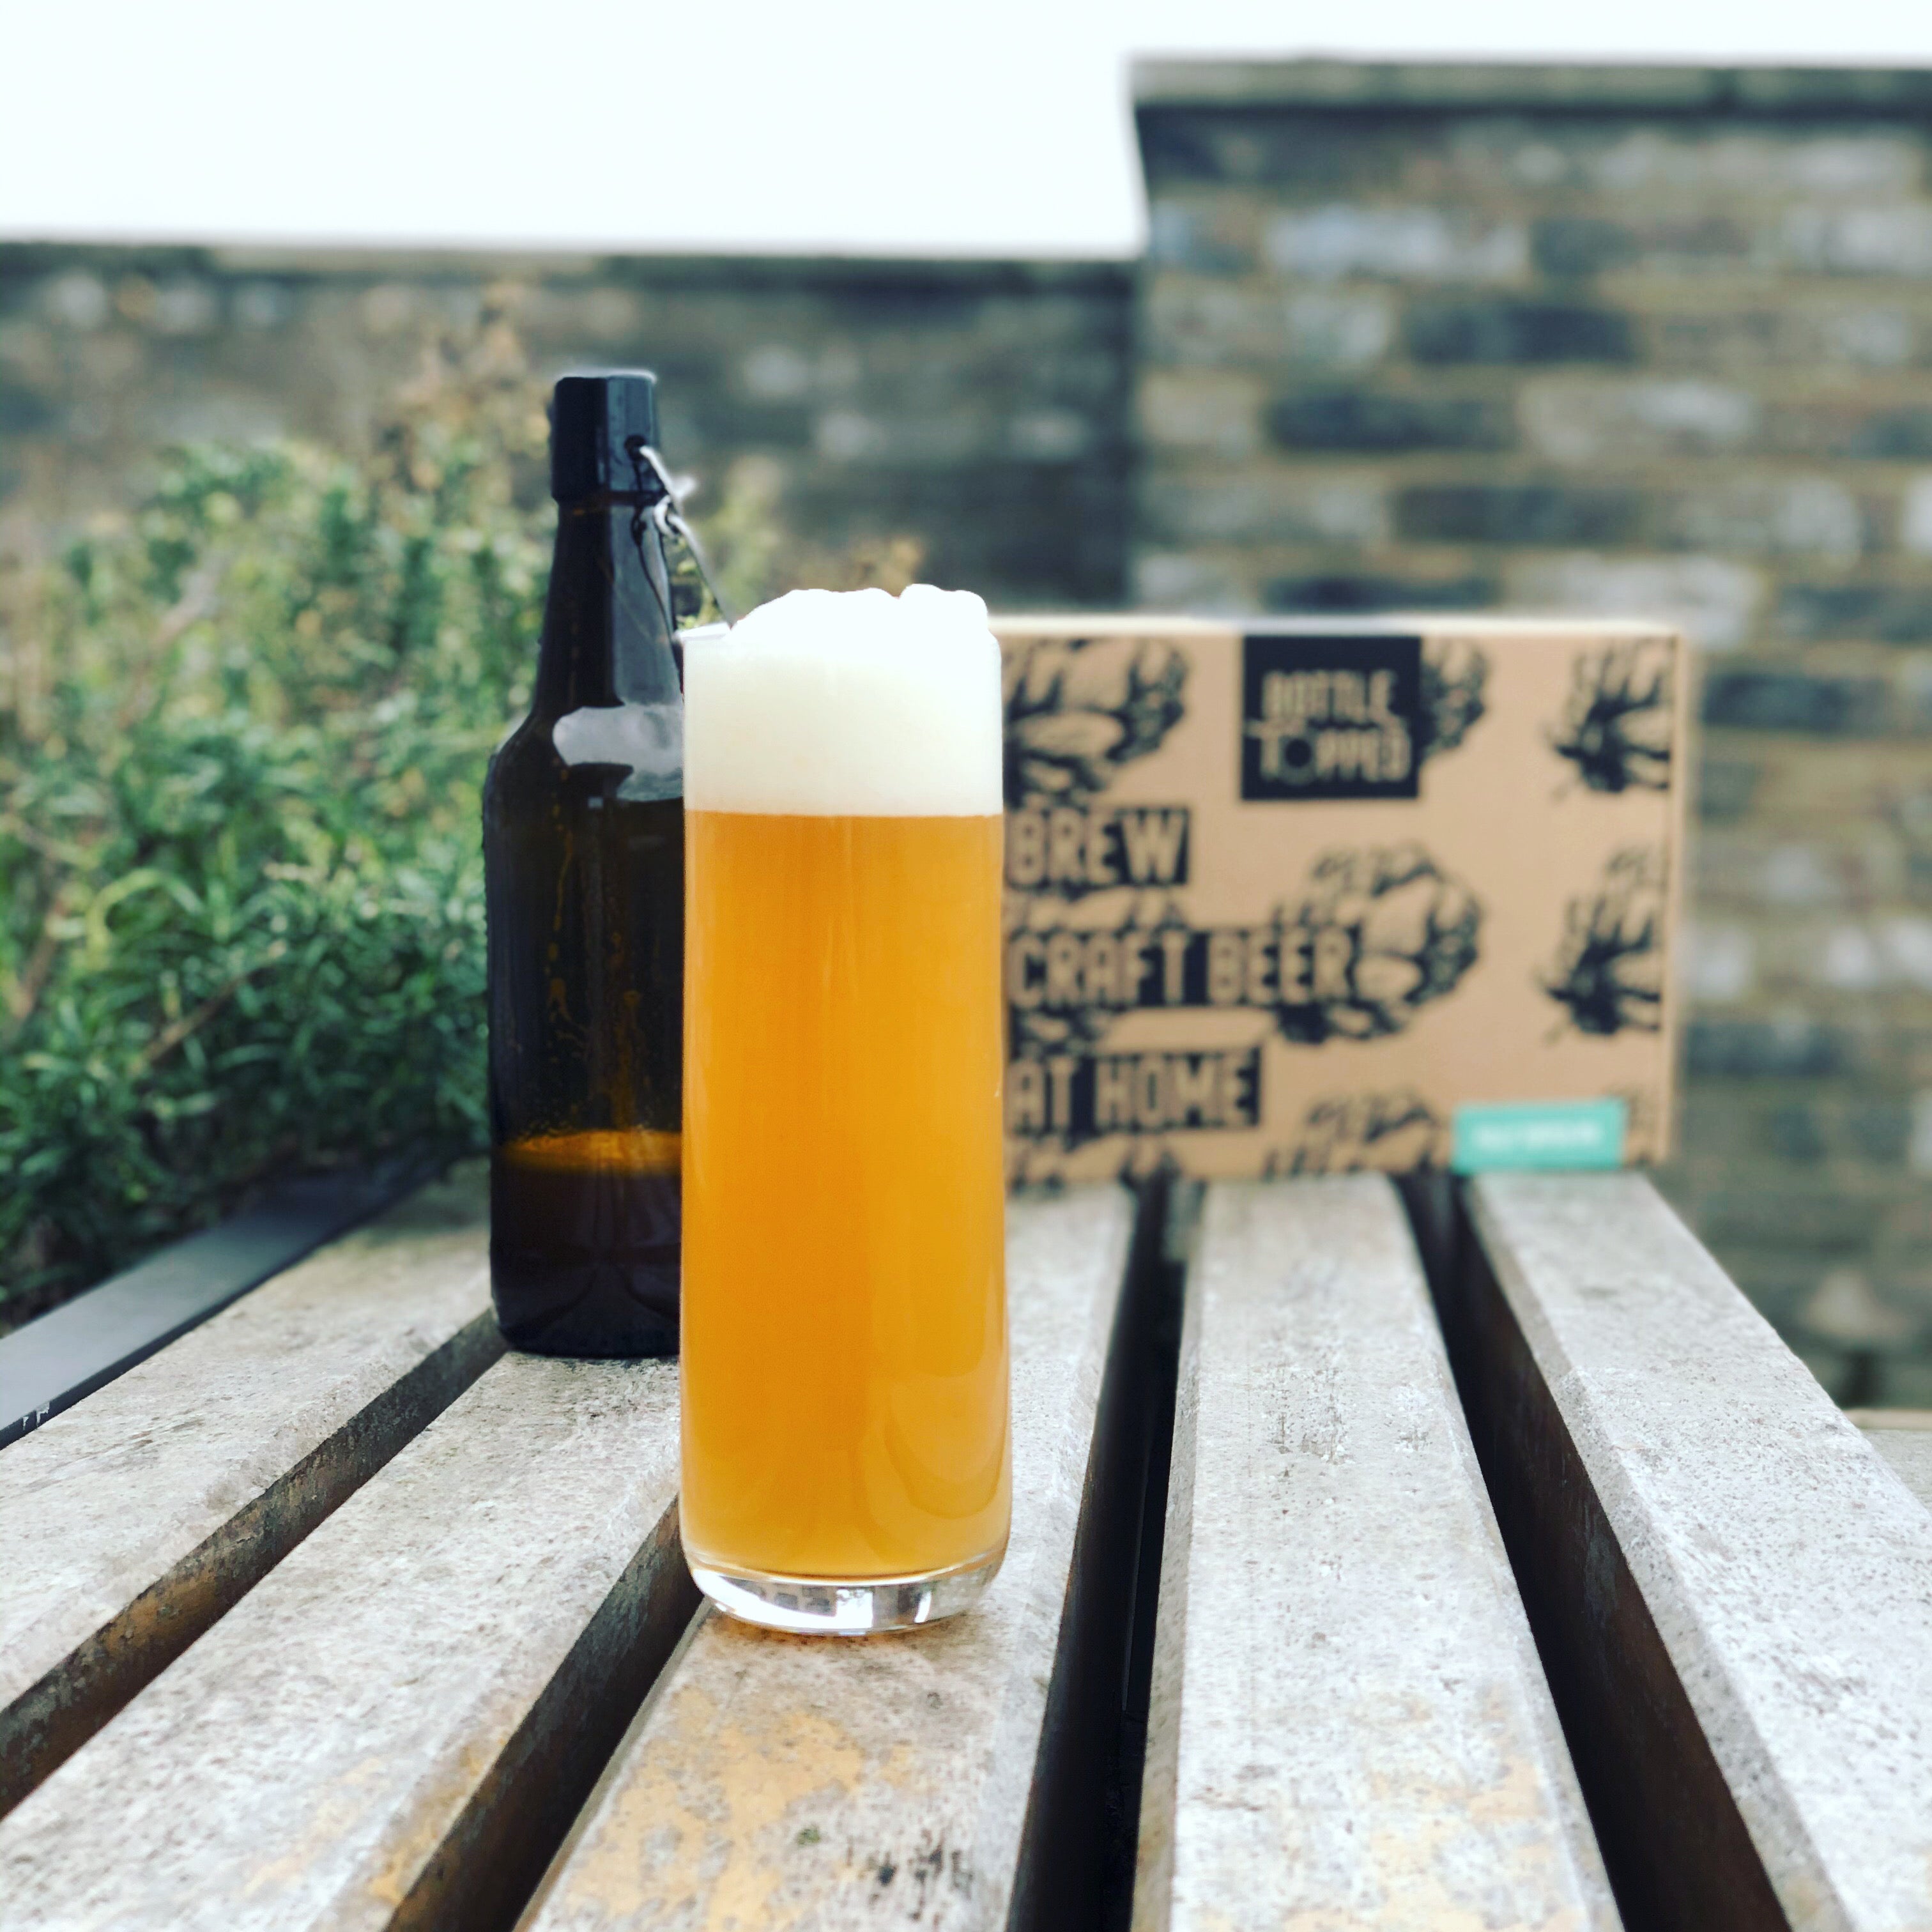 A glass of Bottle Topped craft beer made with our Fully Topped IPA homebrew ingredient kit.